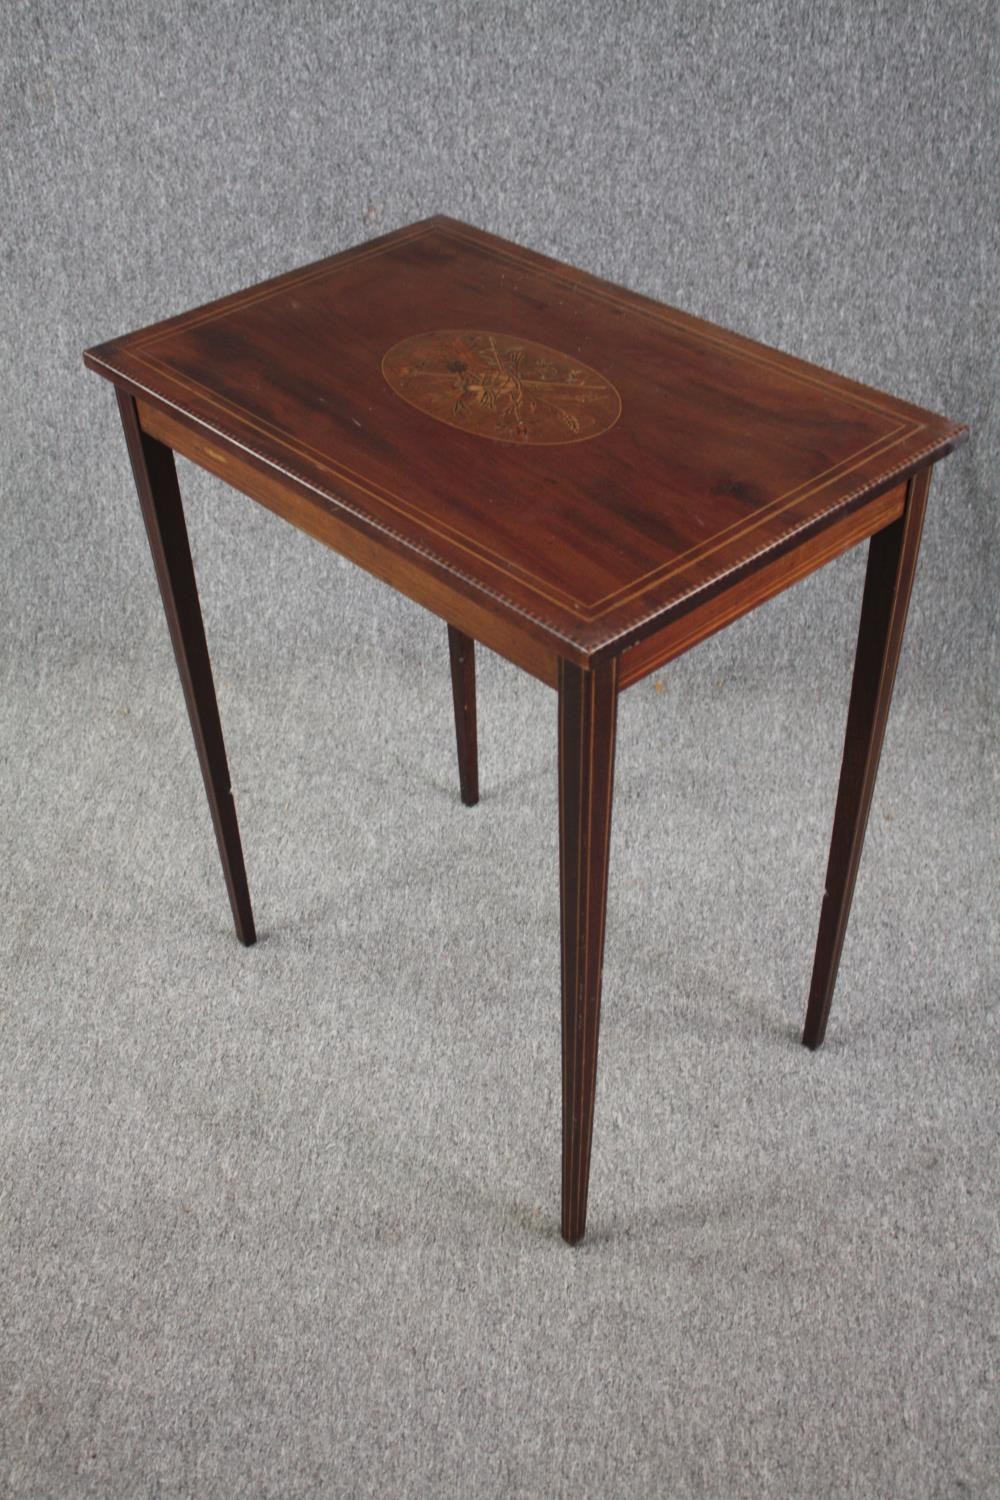 Occasional table, Edwardian mahogany with satinwood marquetry central cartouche. H.78 W.61 D.40cm. - Image 3 of 4